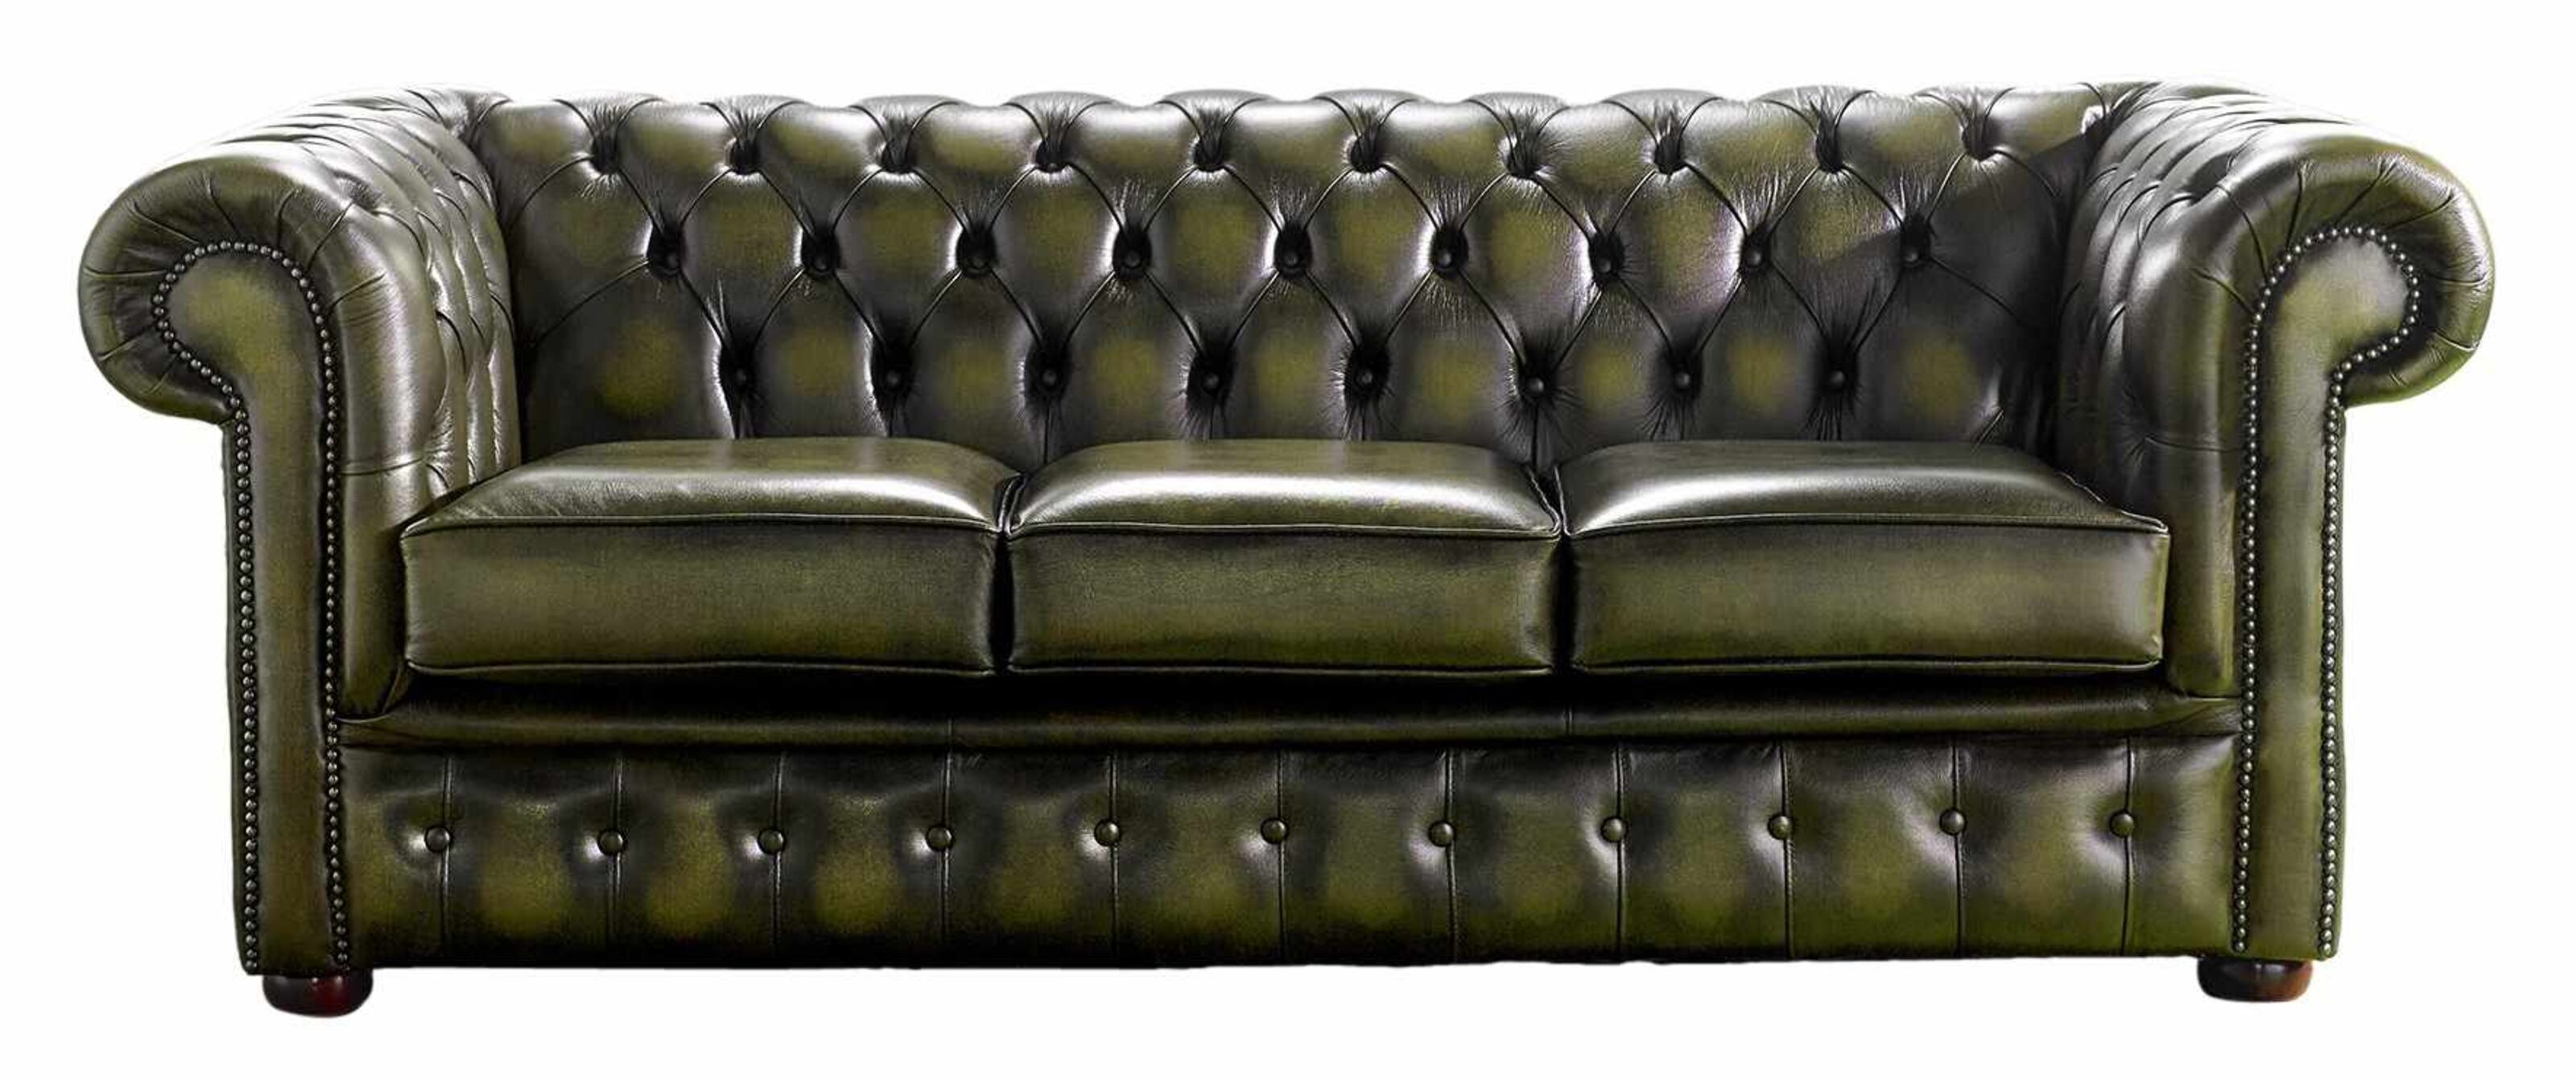 Varieties of Elegance Exploring the Diversity Among Chesterfield Sofas  %Post Title